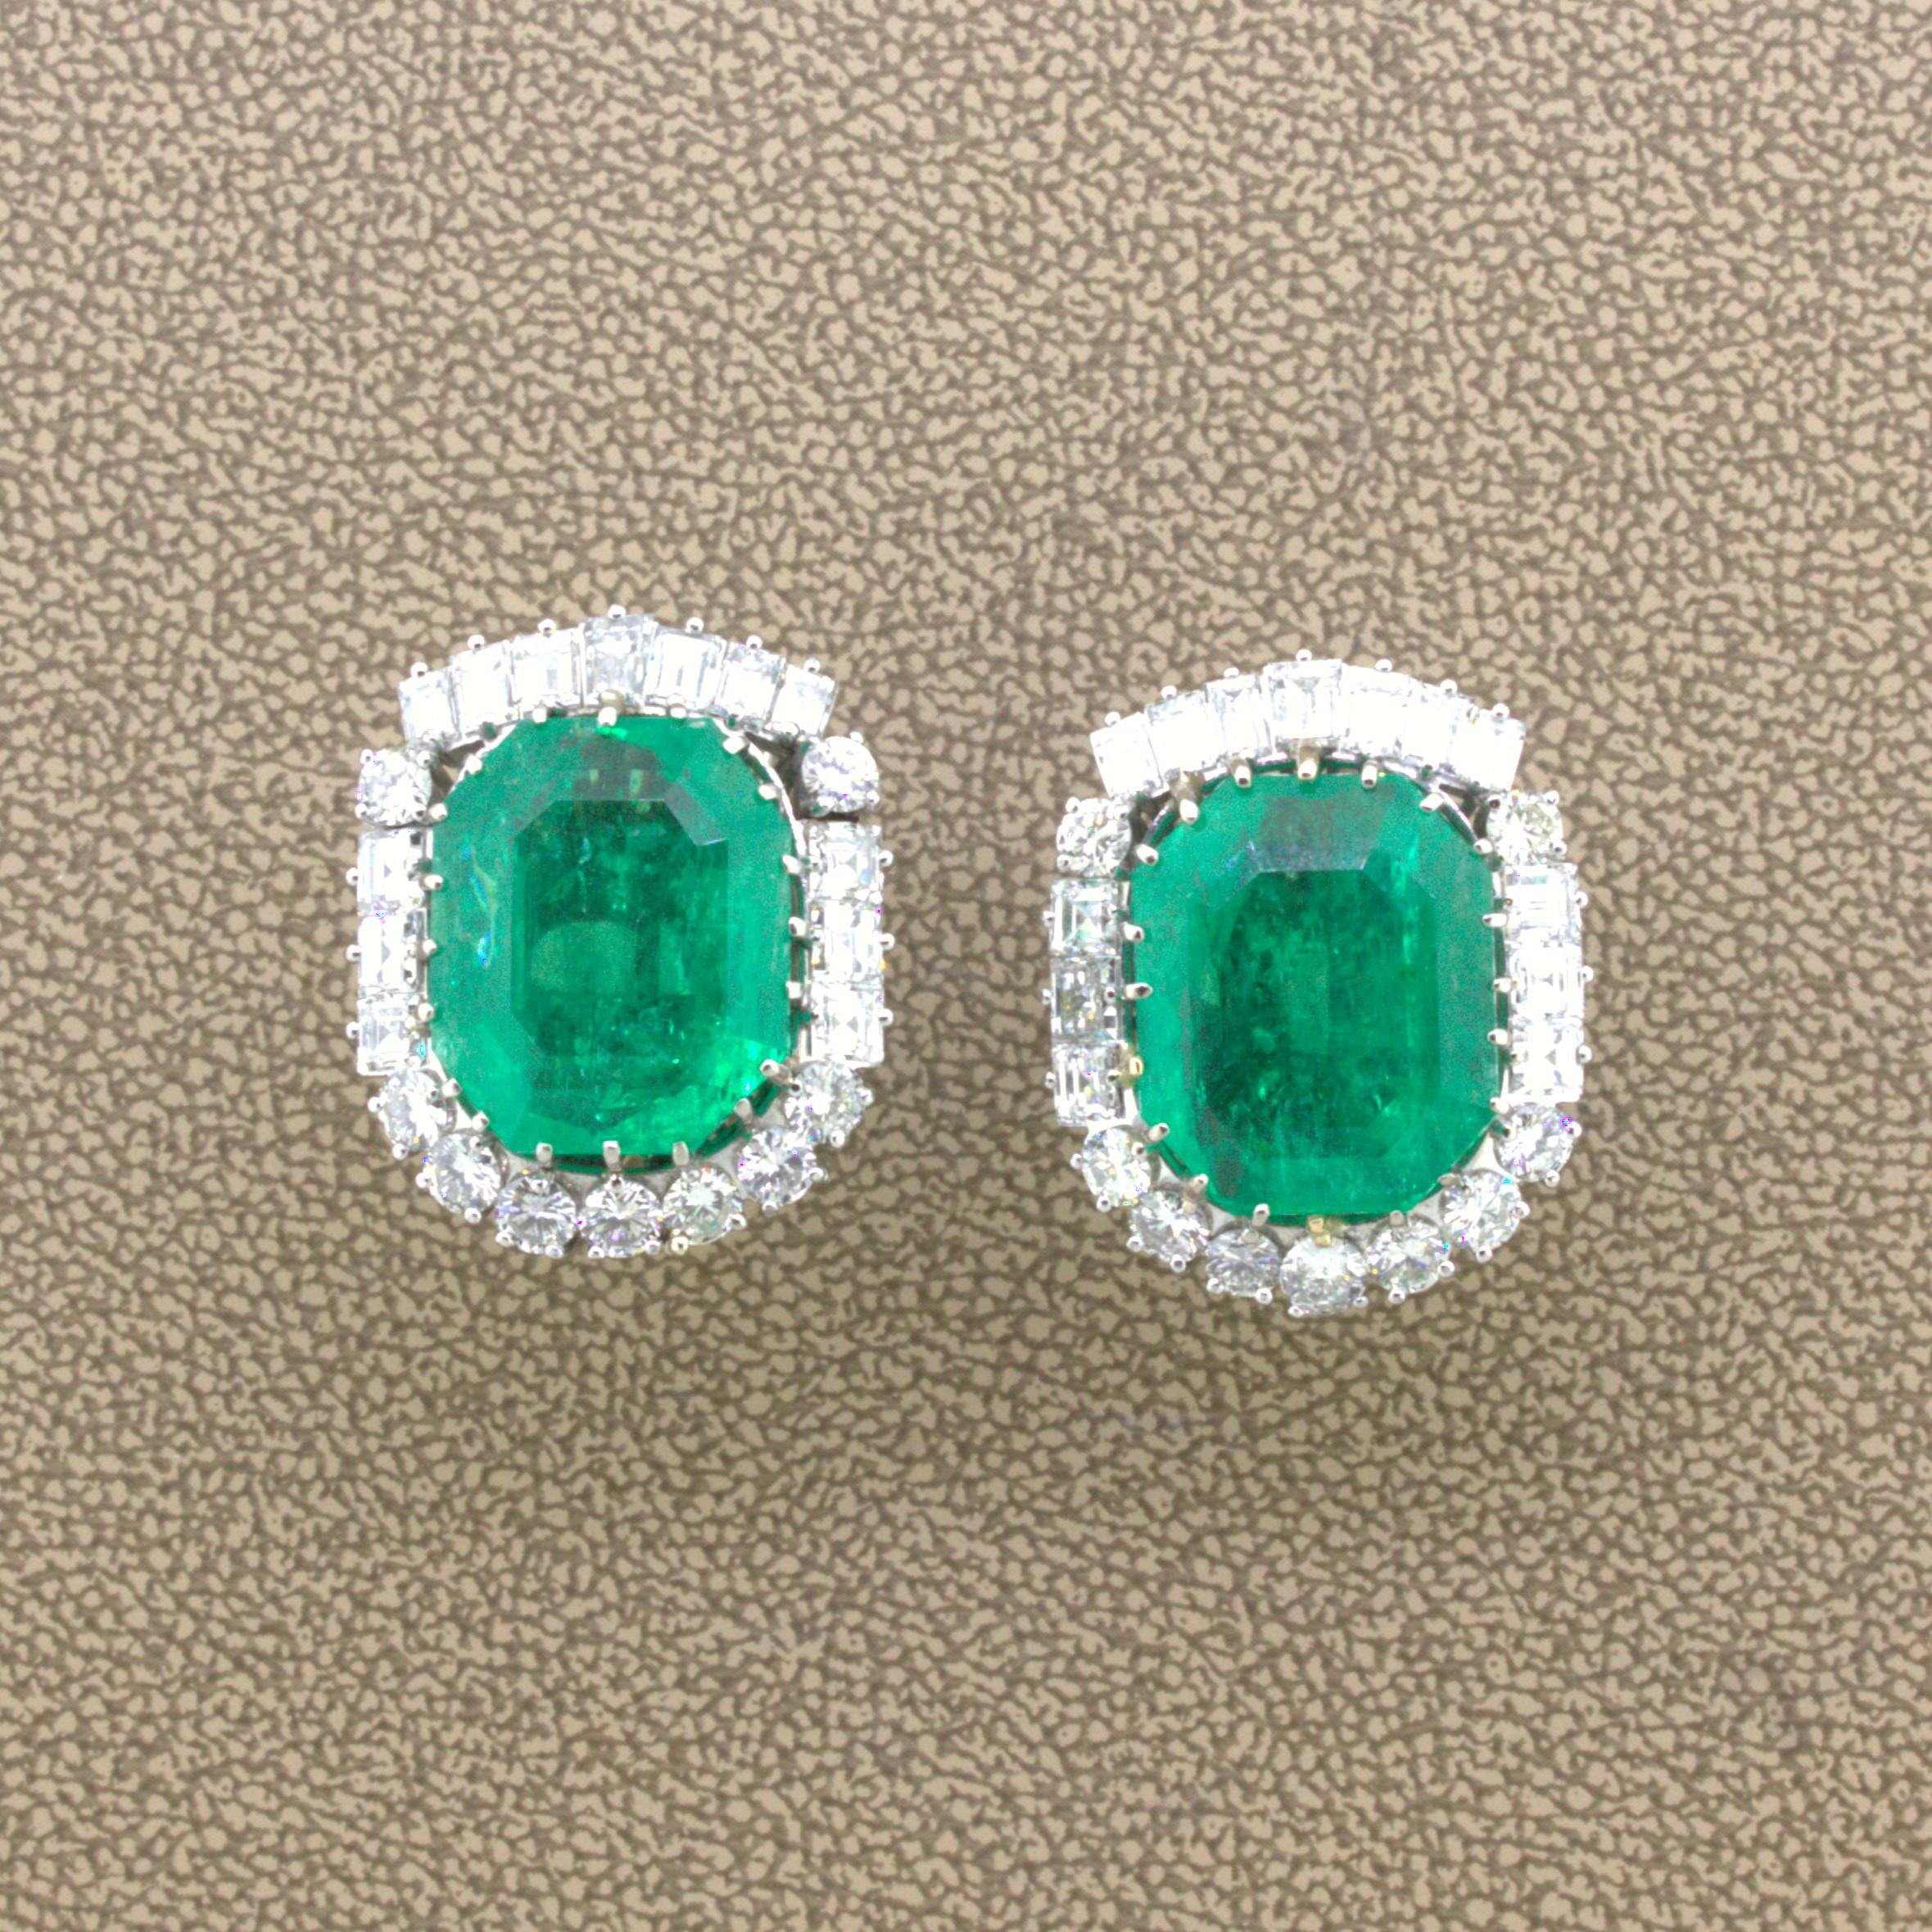 Mid-Century 25.04 Carat Colombian Emerald Diamond 18K Gold Earrings, GIA Certified

A very impressive pair of Colombian emerald earrings with each emerald weighing over 12 carats for a total of 25.04 carats. What makes these earrings impressive are